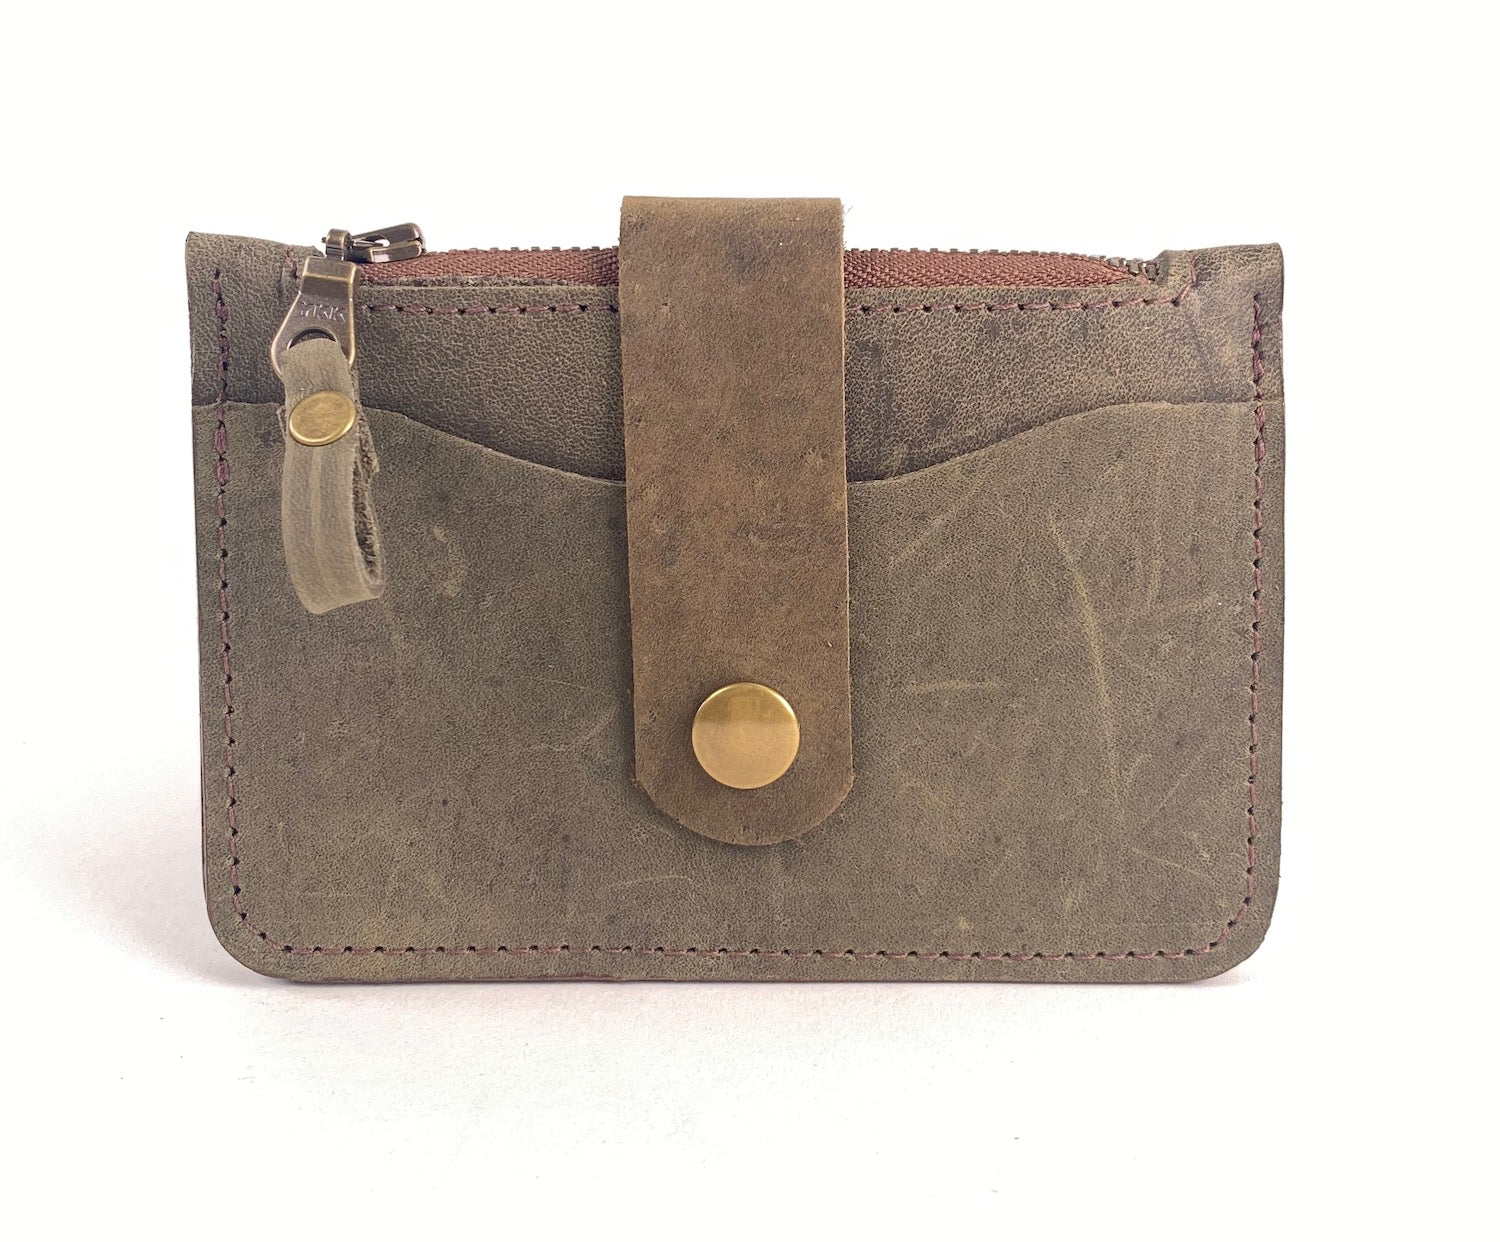 Olive green leather wallet with card pockets and zipper